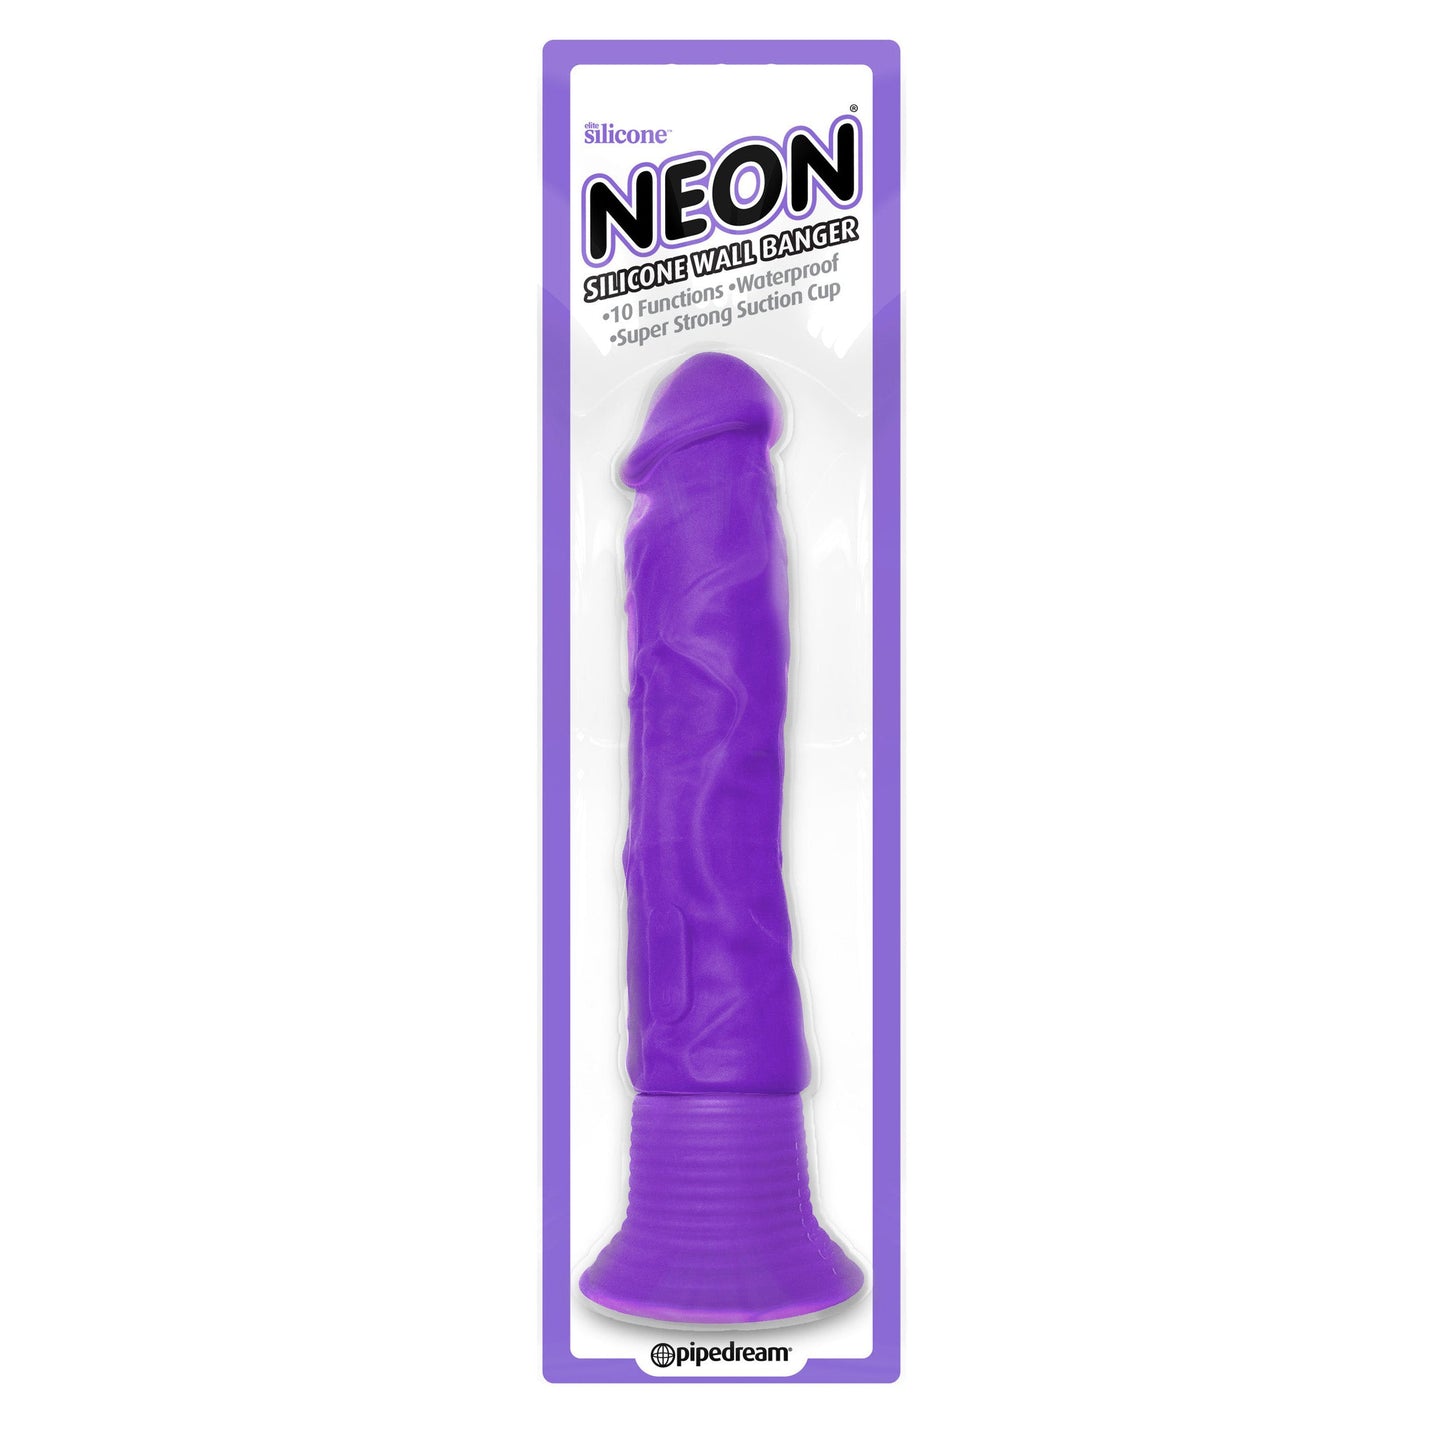 Neon Silicone 6" Wall Banger - Purple - Thorn & Feather Sex Toy Canada